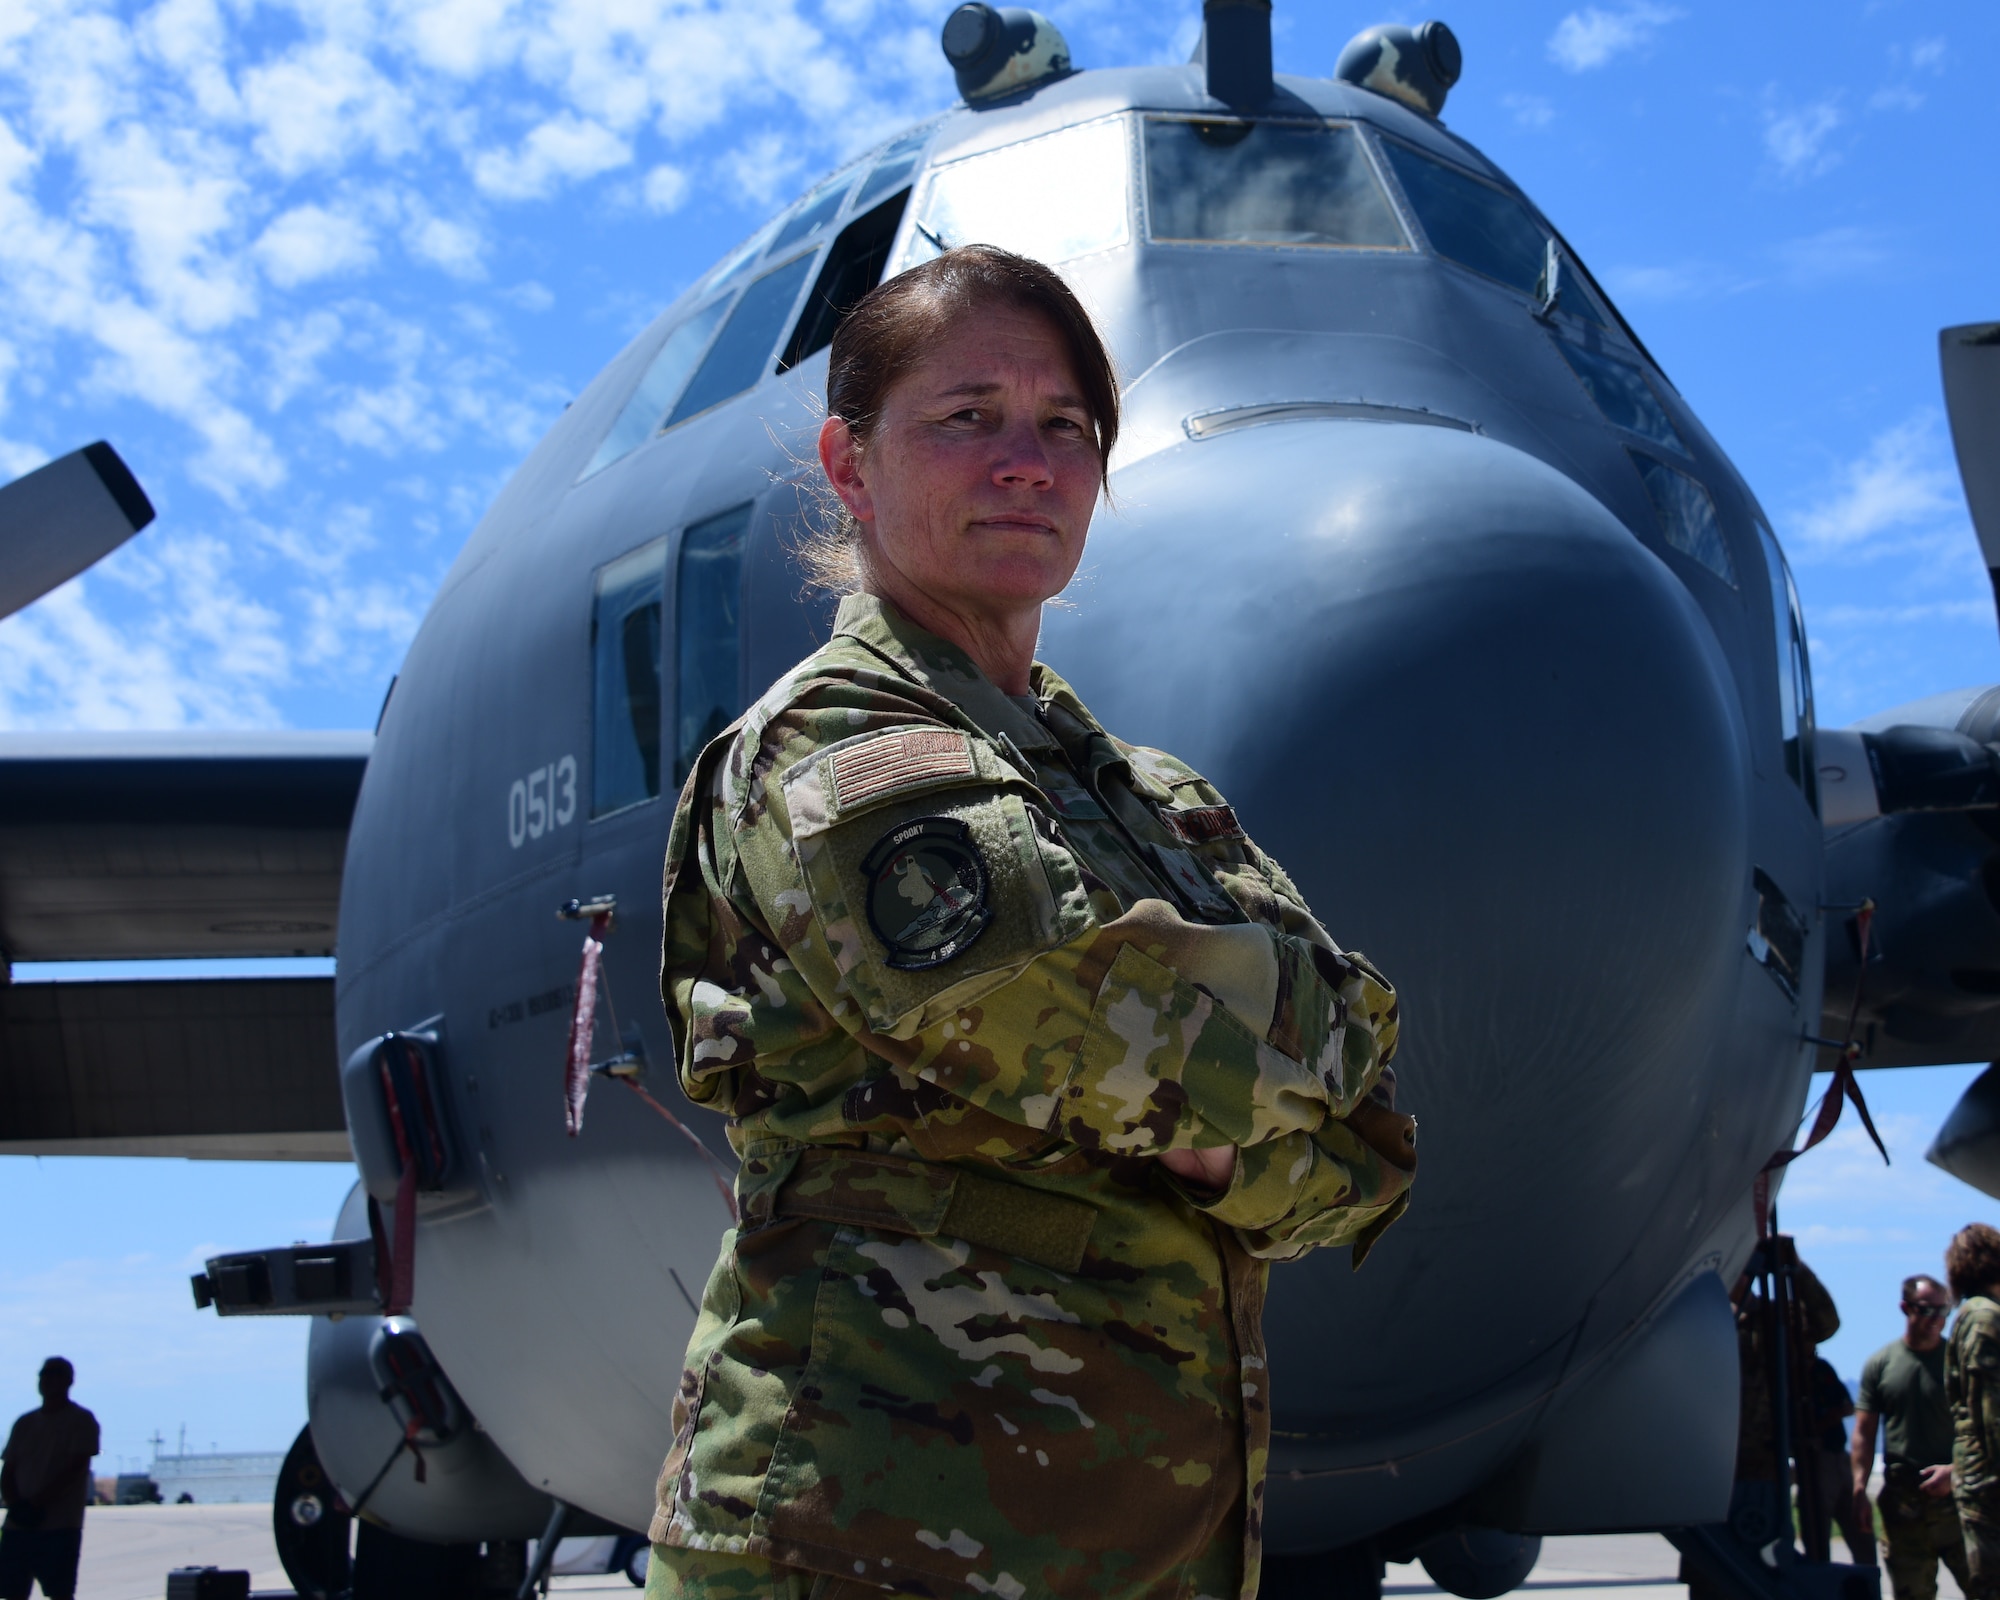 a photo of the pilot posing in front of her AC-130 Gunship